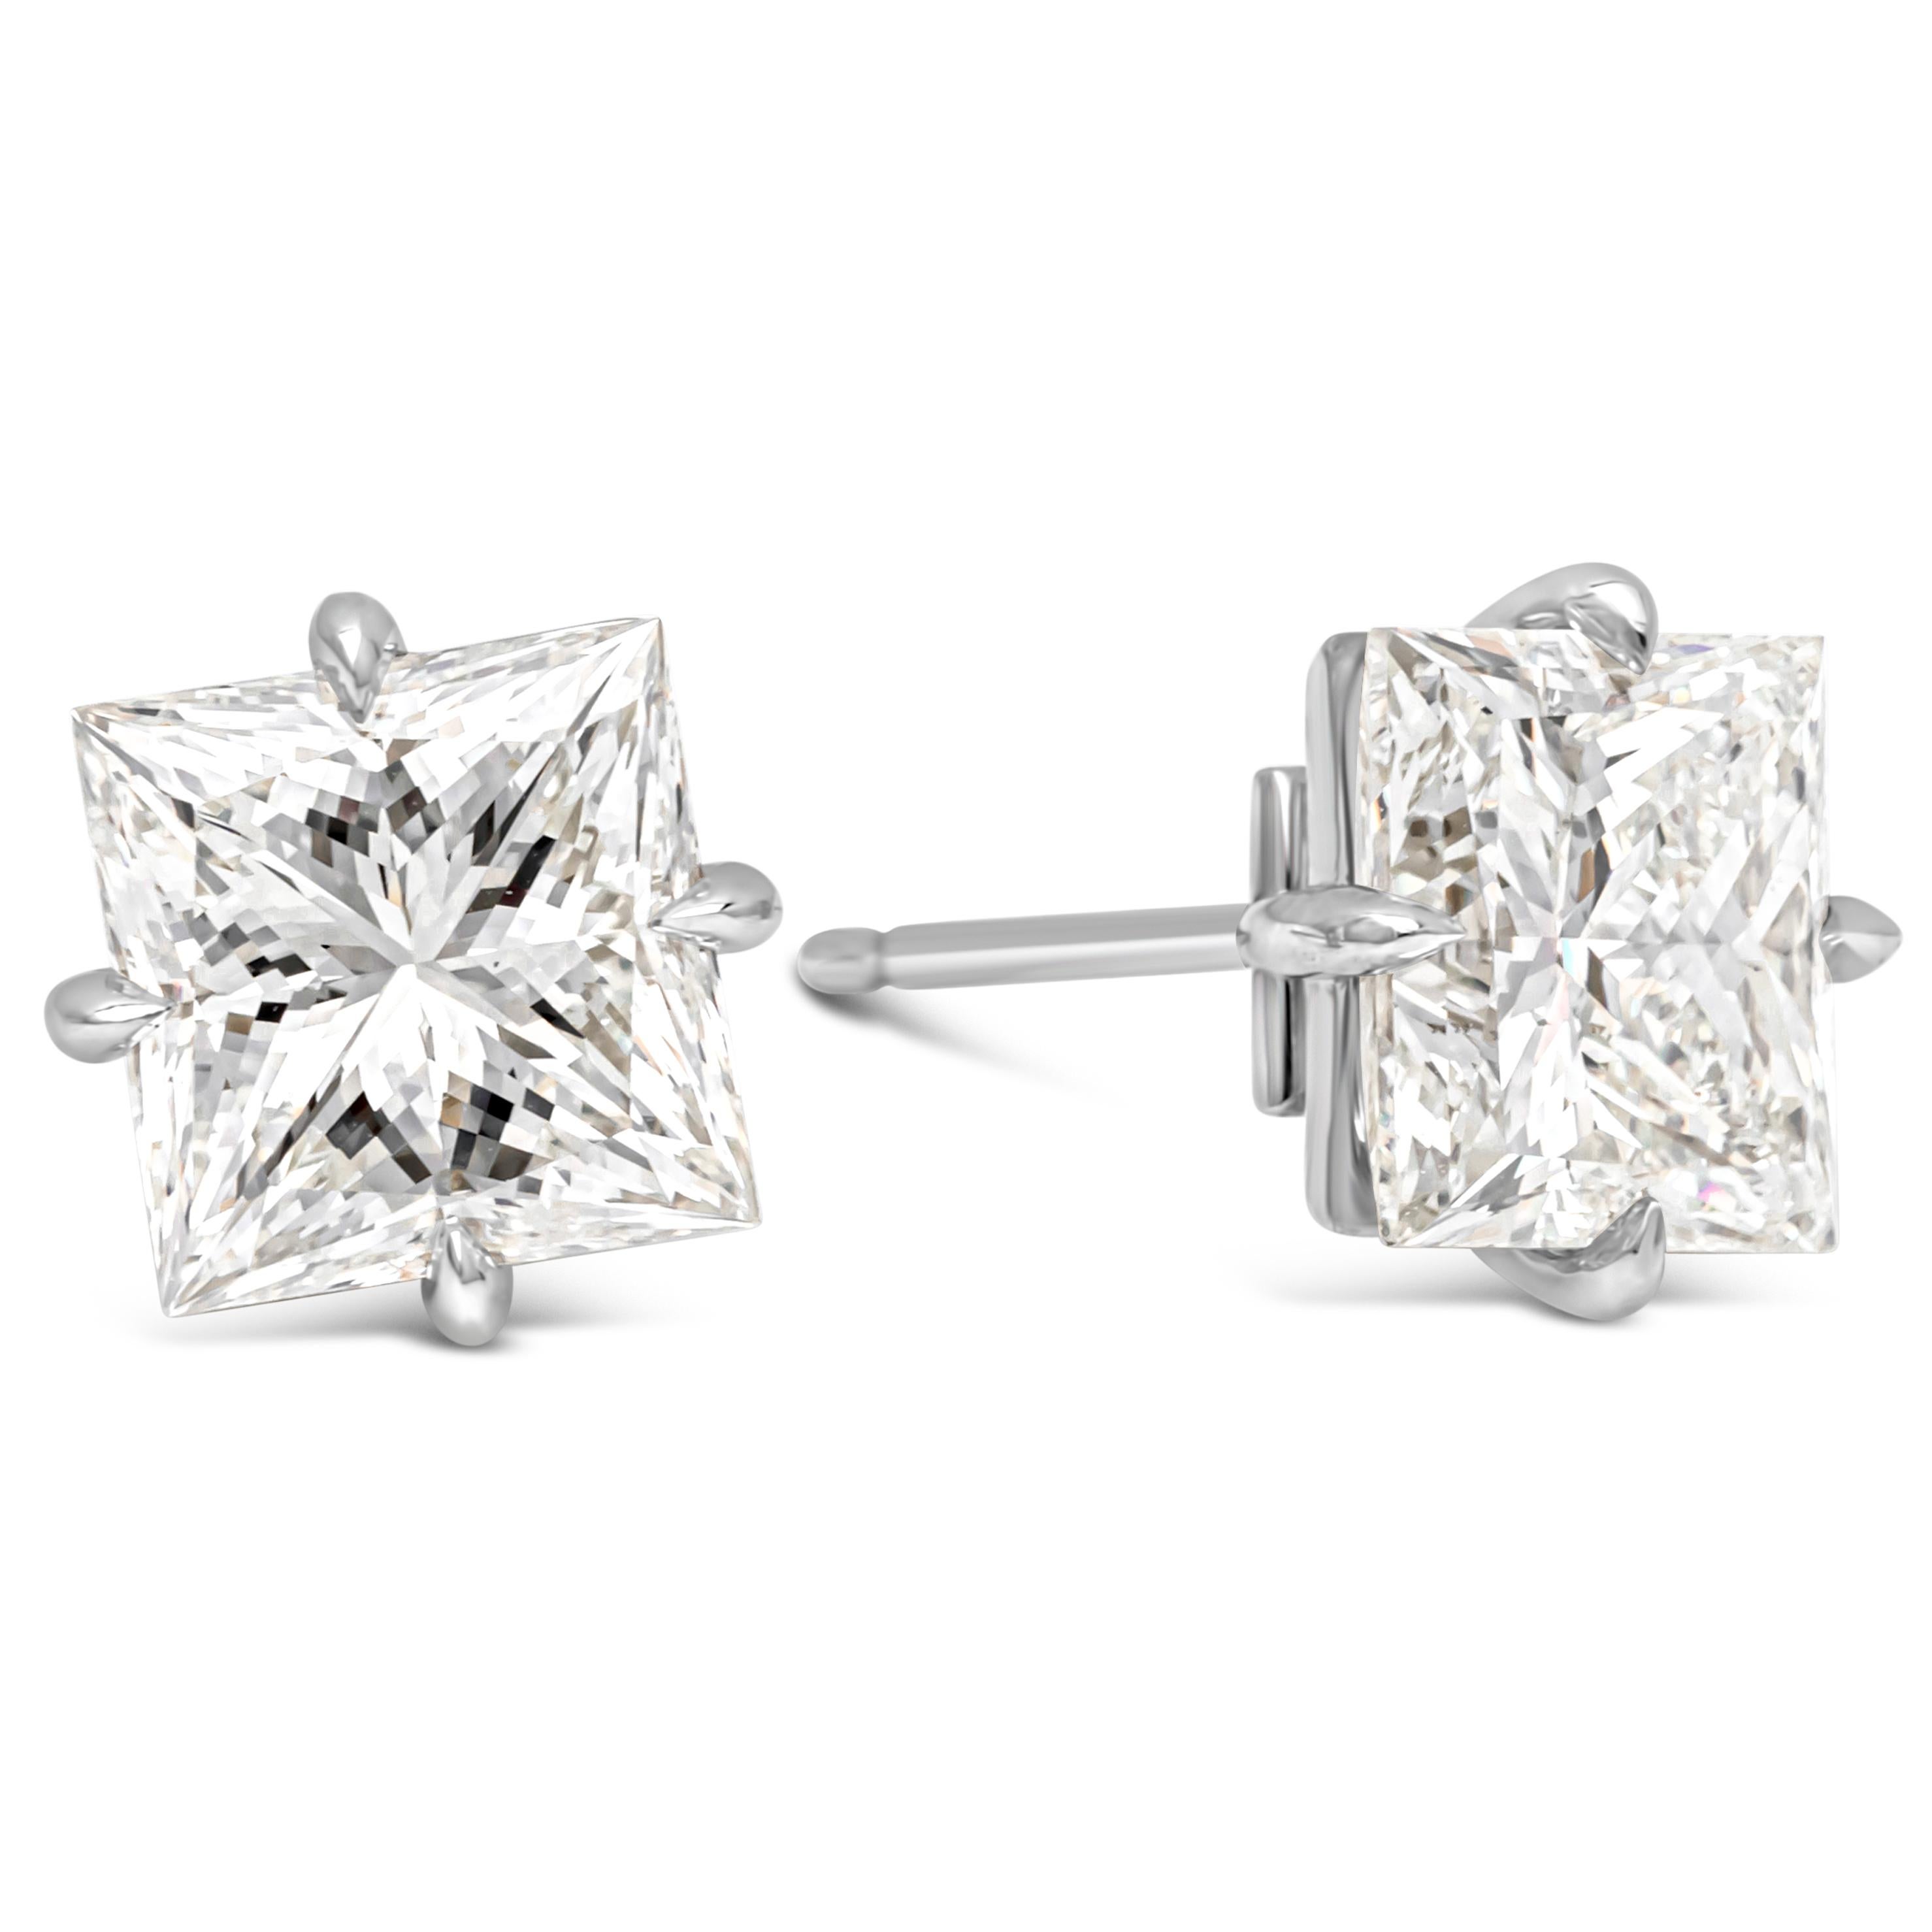 Elegantly made classic pair of stud earrings showcasing two luxurious princess cut brilliant diamonds, weighing 6.07 carats total certified by GIA as I color and SI1-VS1 in clarity. Set in a traditional four prong setting and finely made in